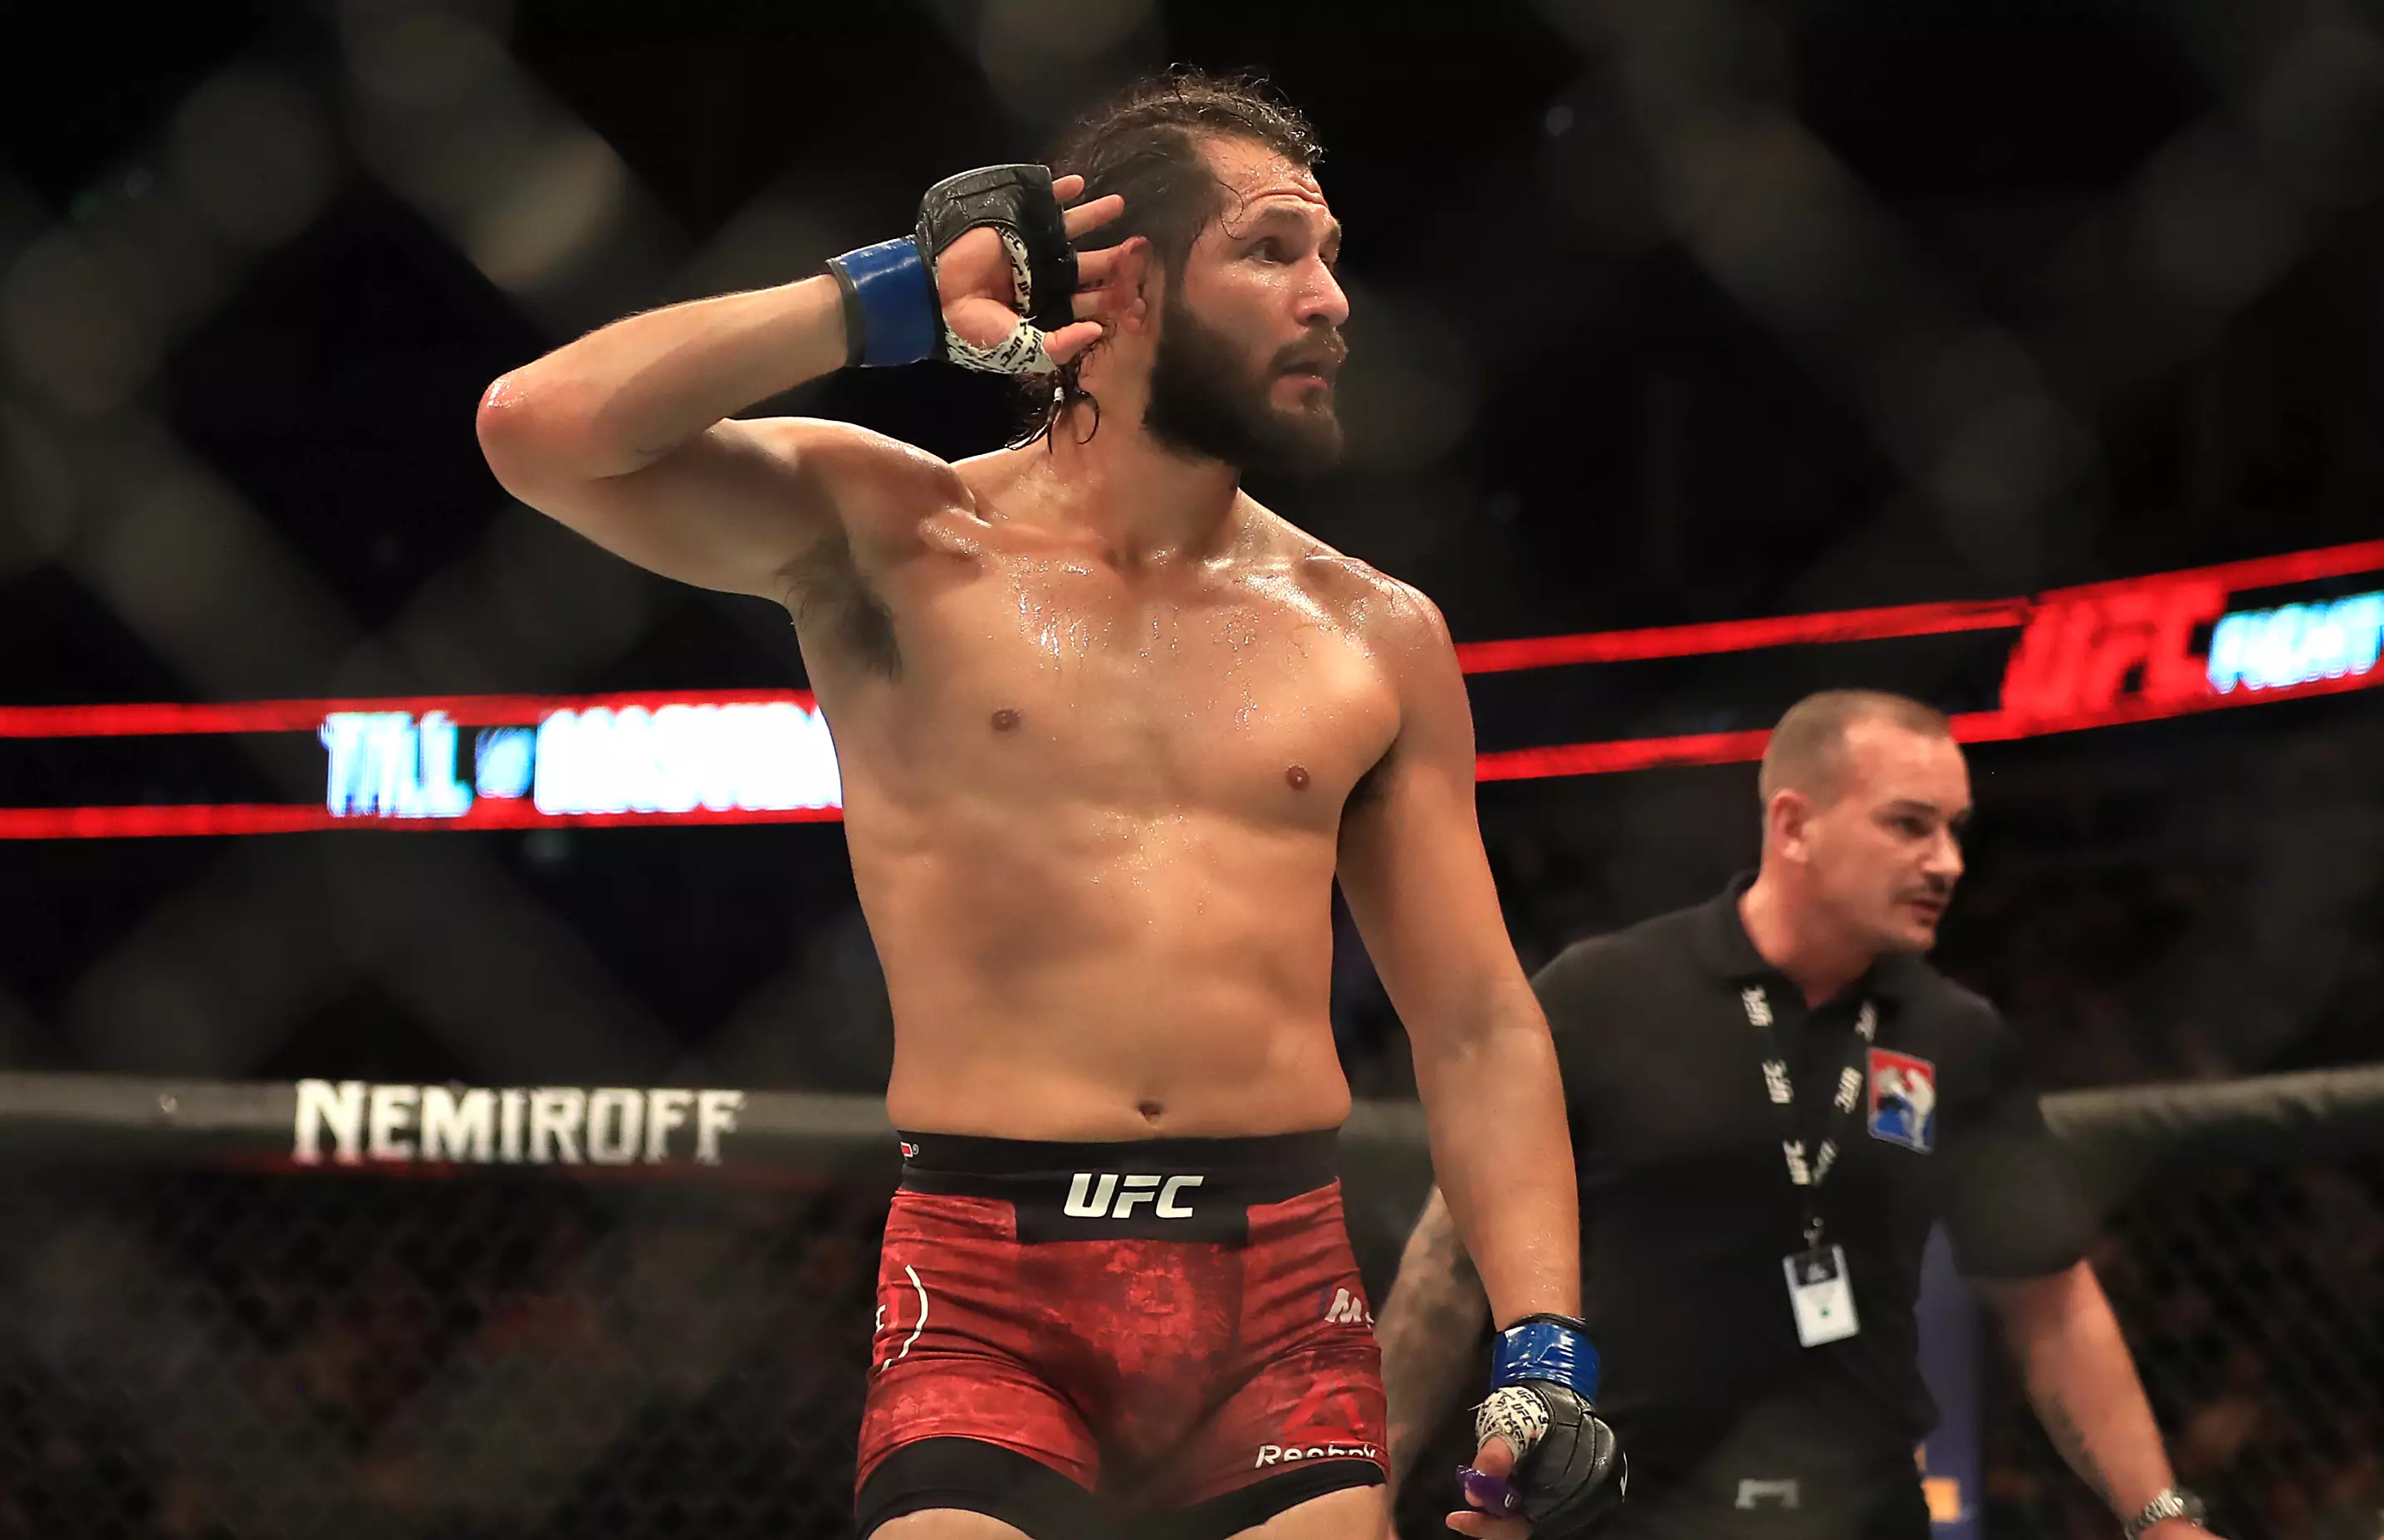 Jorge Masvidal wants to fight Conor McGregor or have a shot at the title